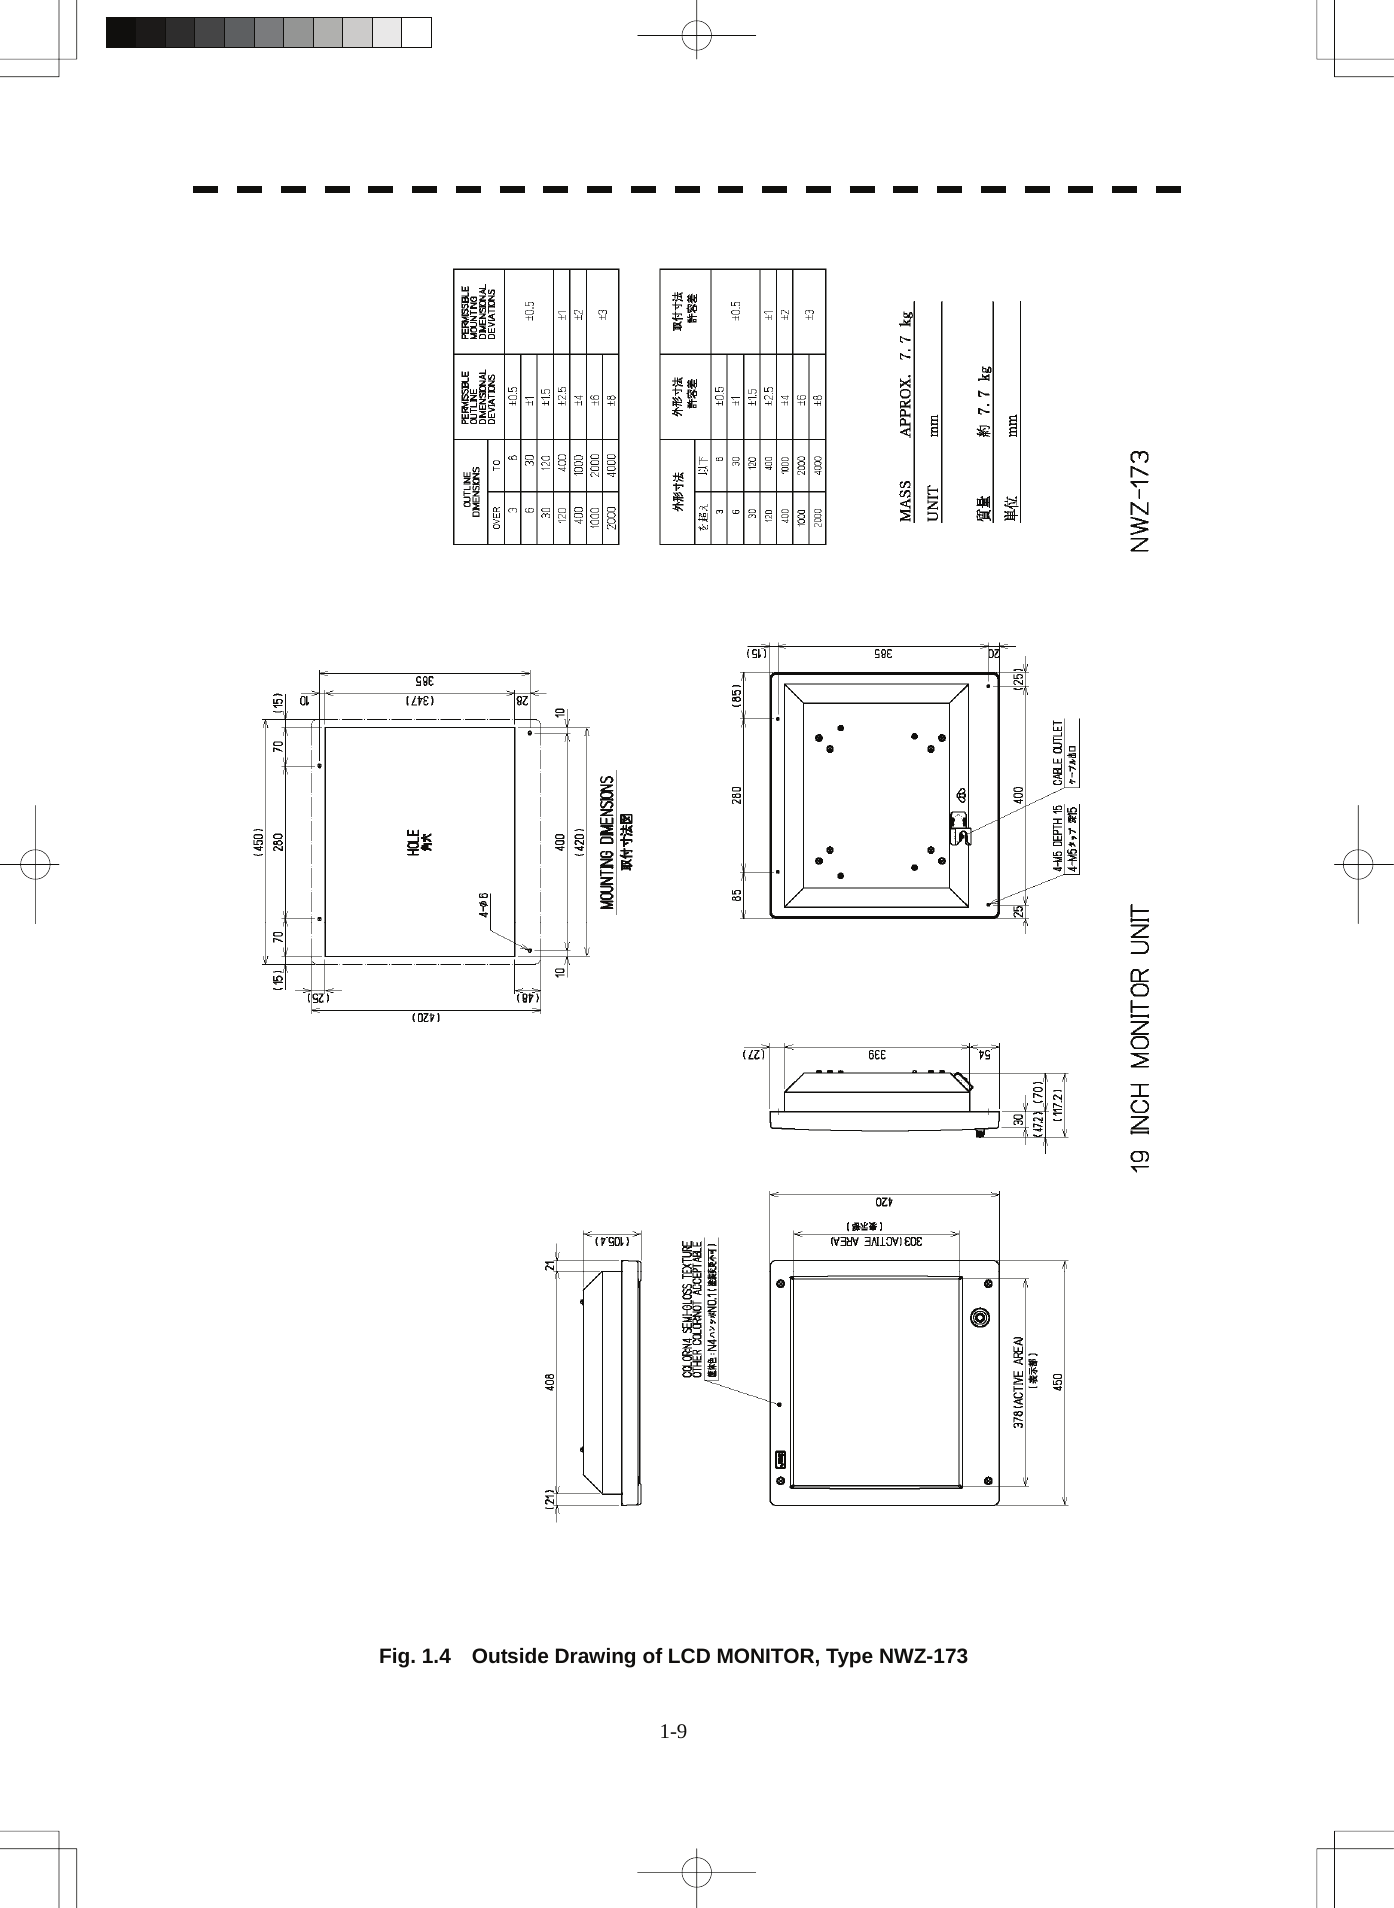  1-9   Fig. 1.4    Outside Drawing of LCD MONITOR, Type NWZ-173 